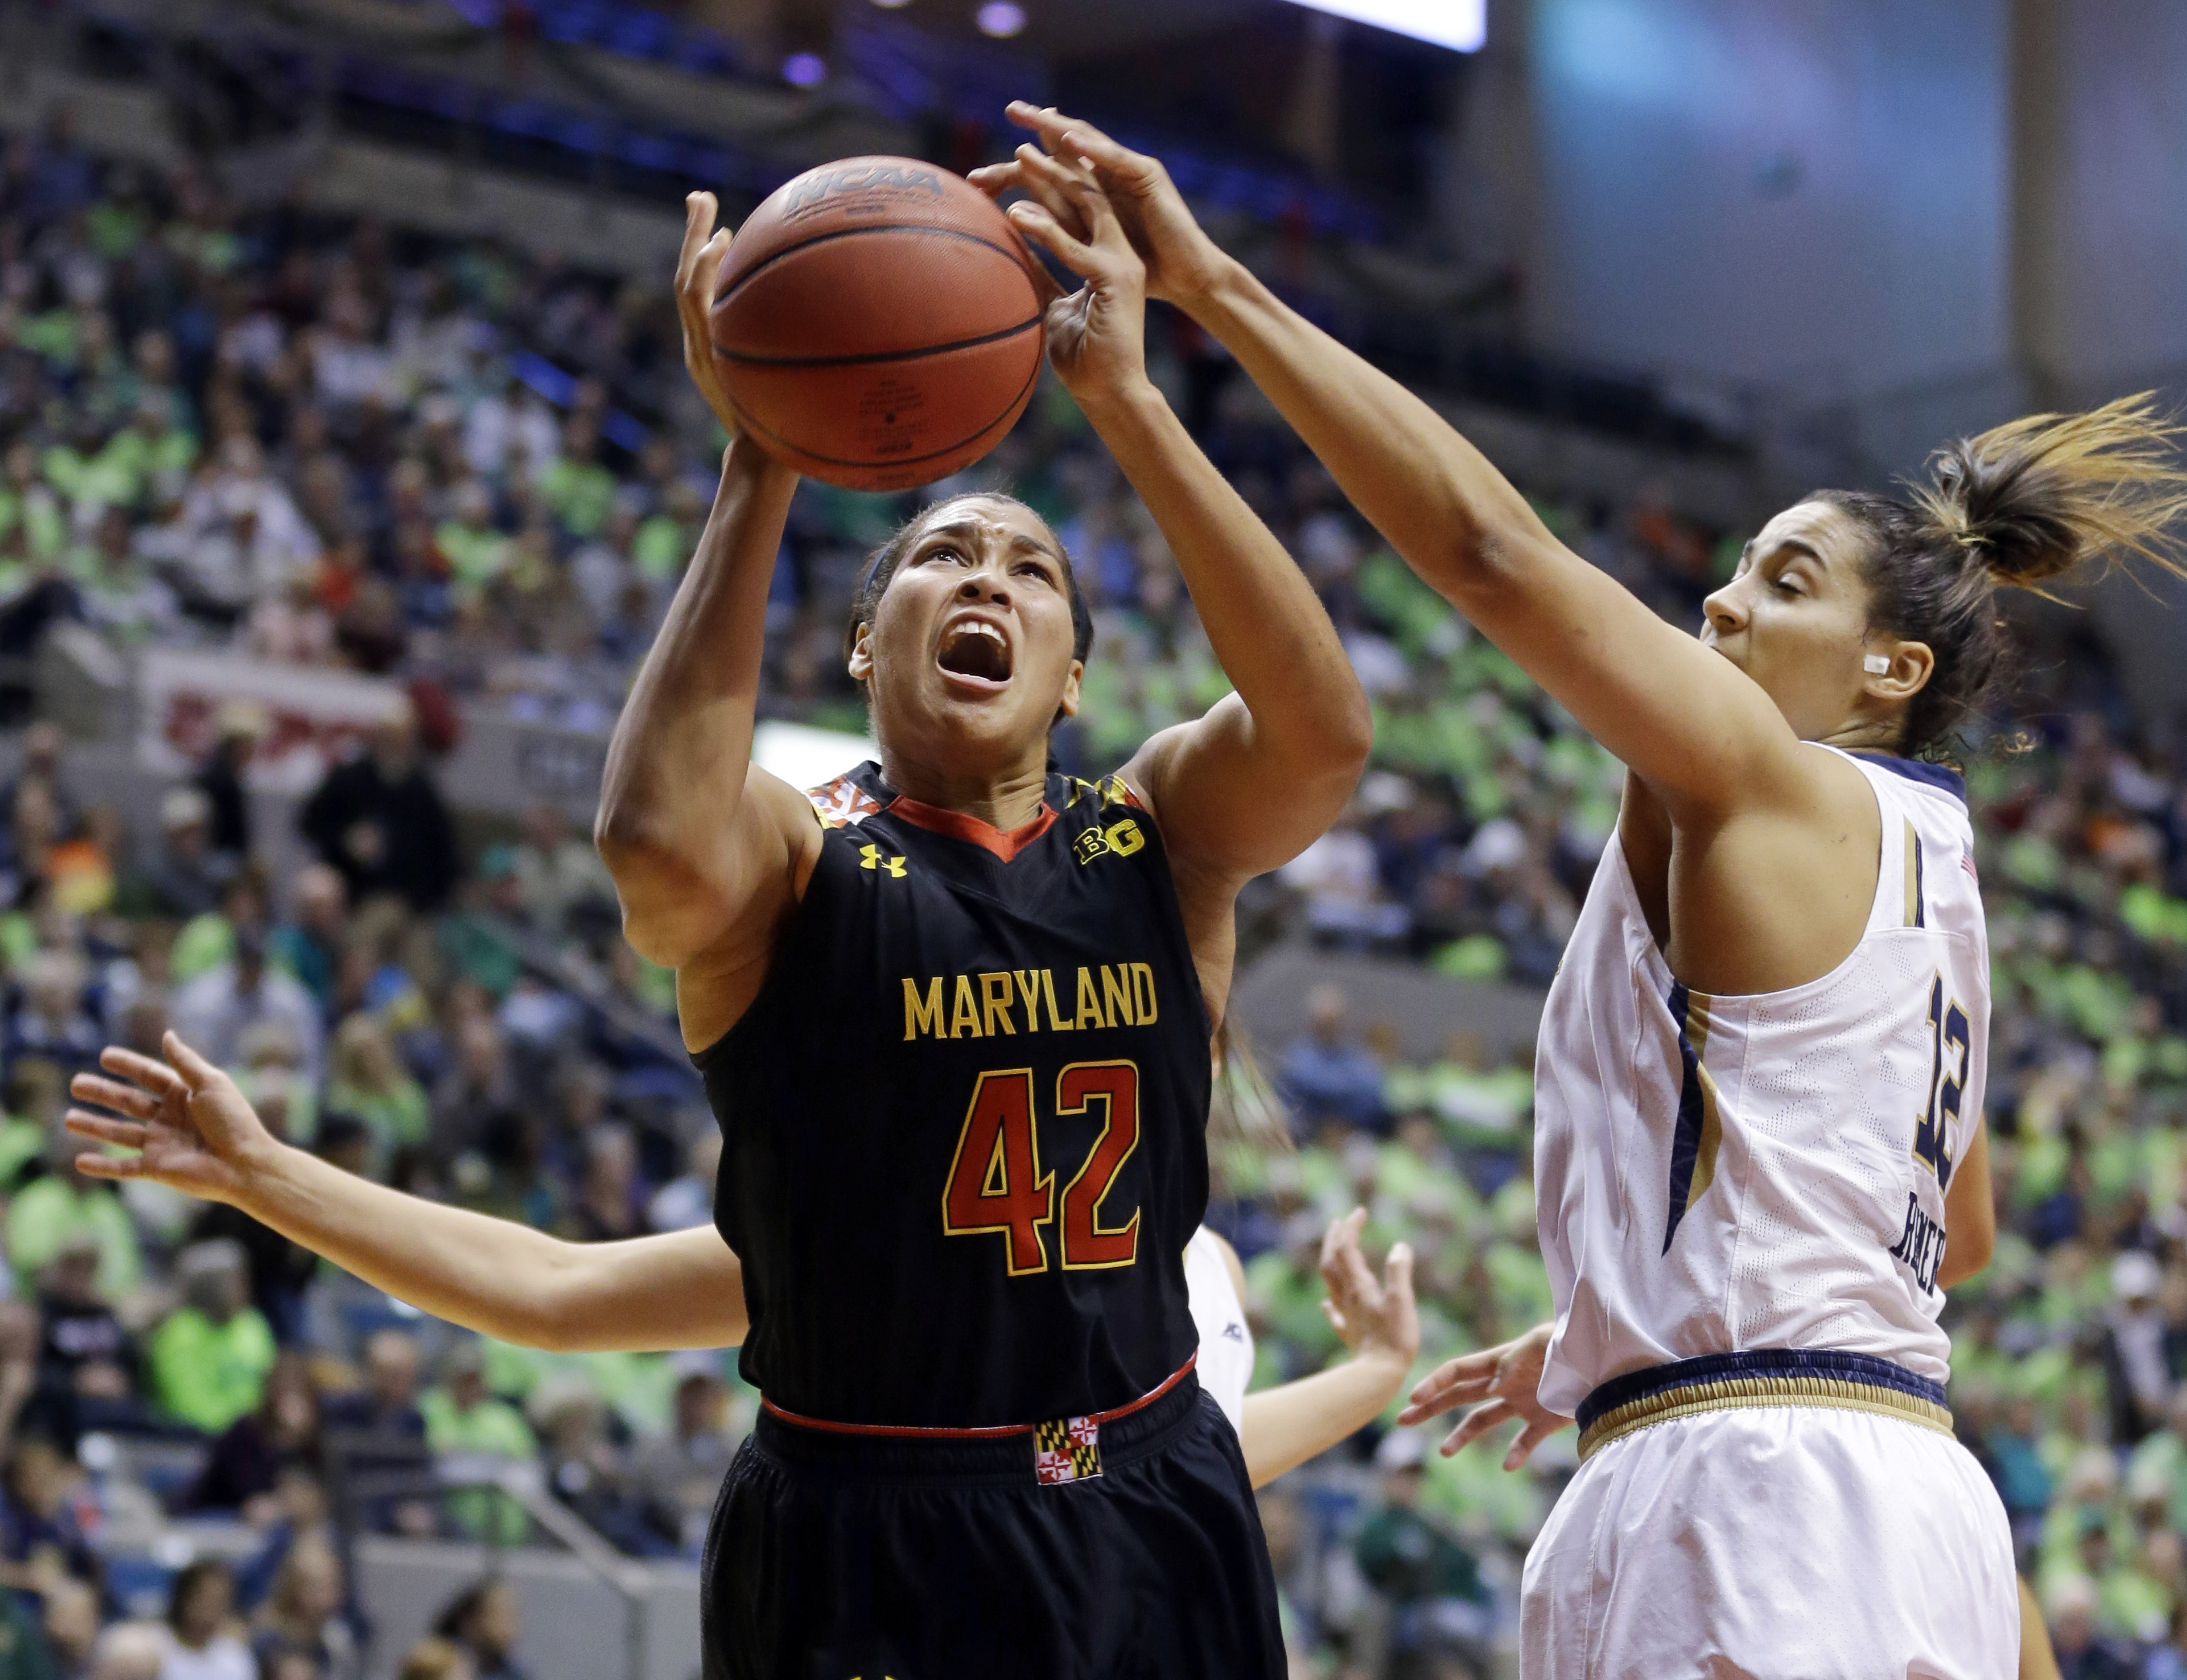 No. 10 Md. Terps play Towson